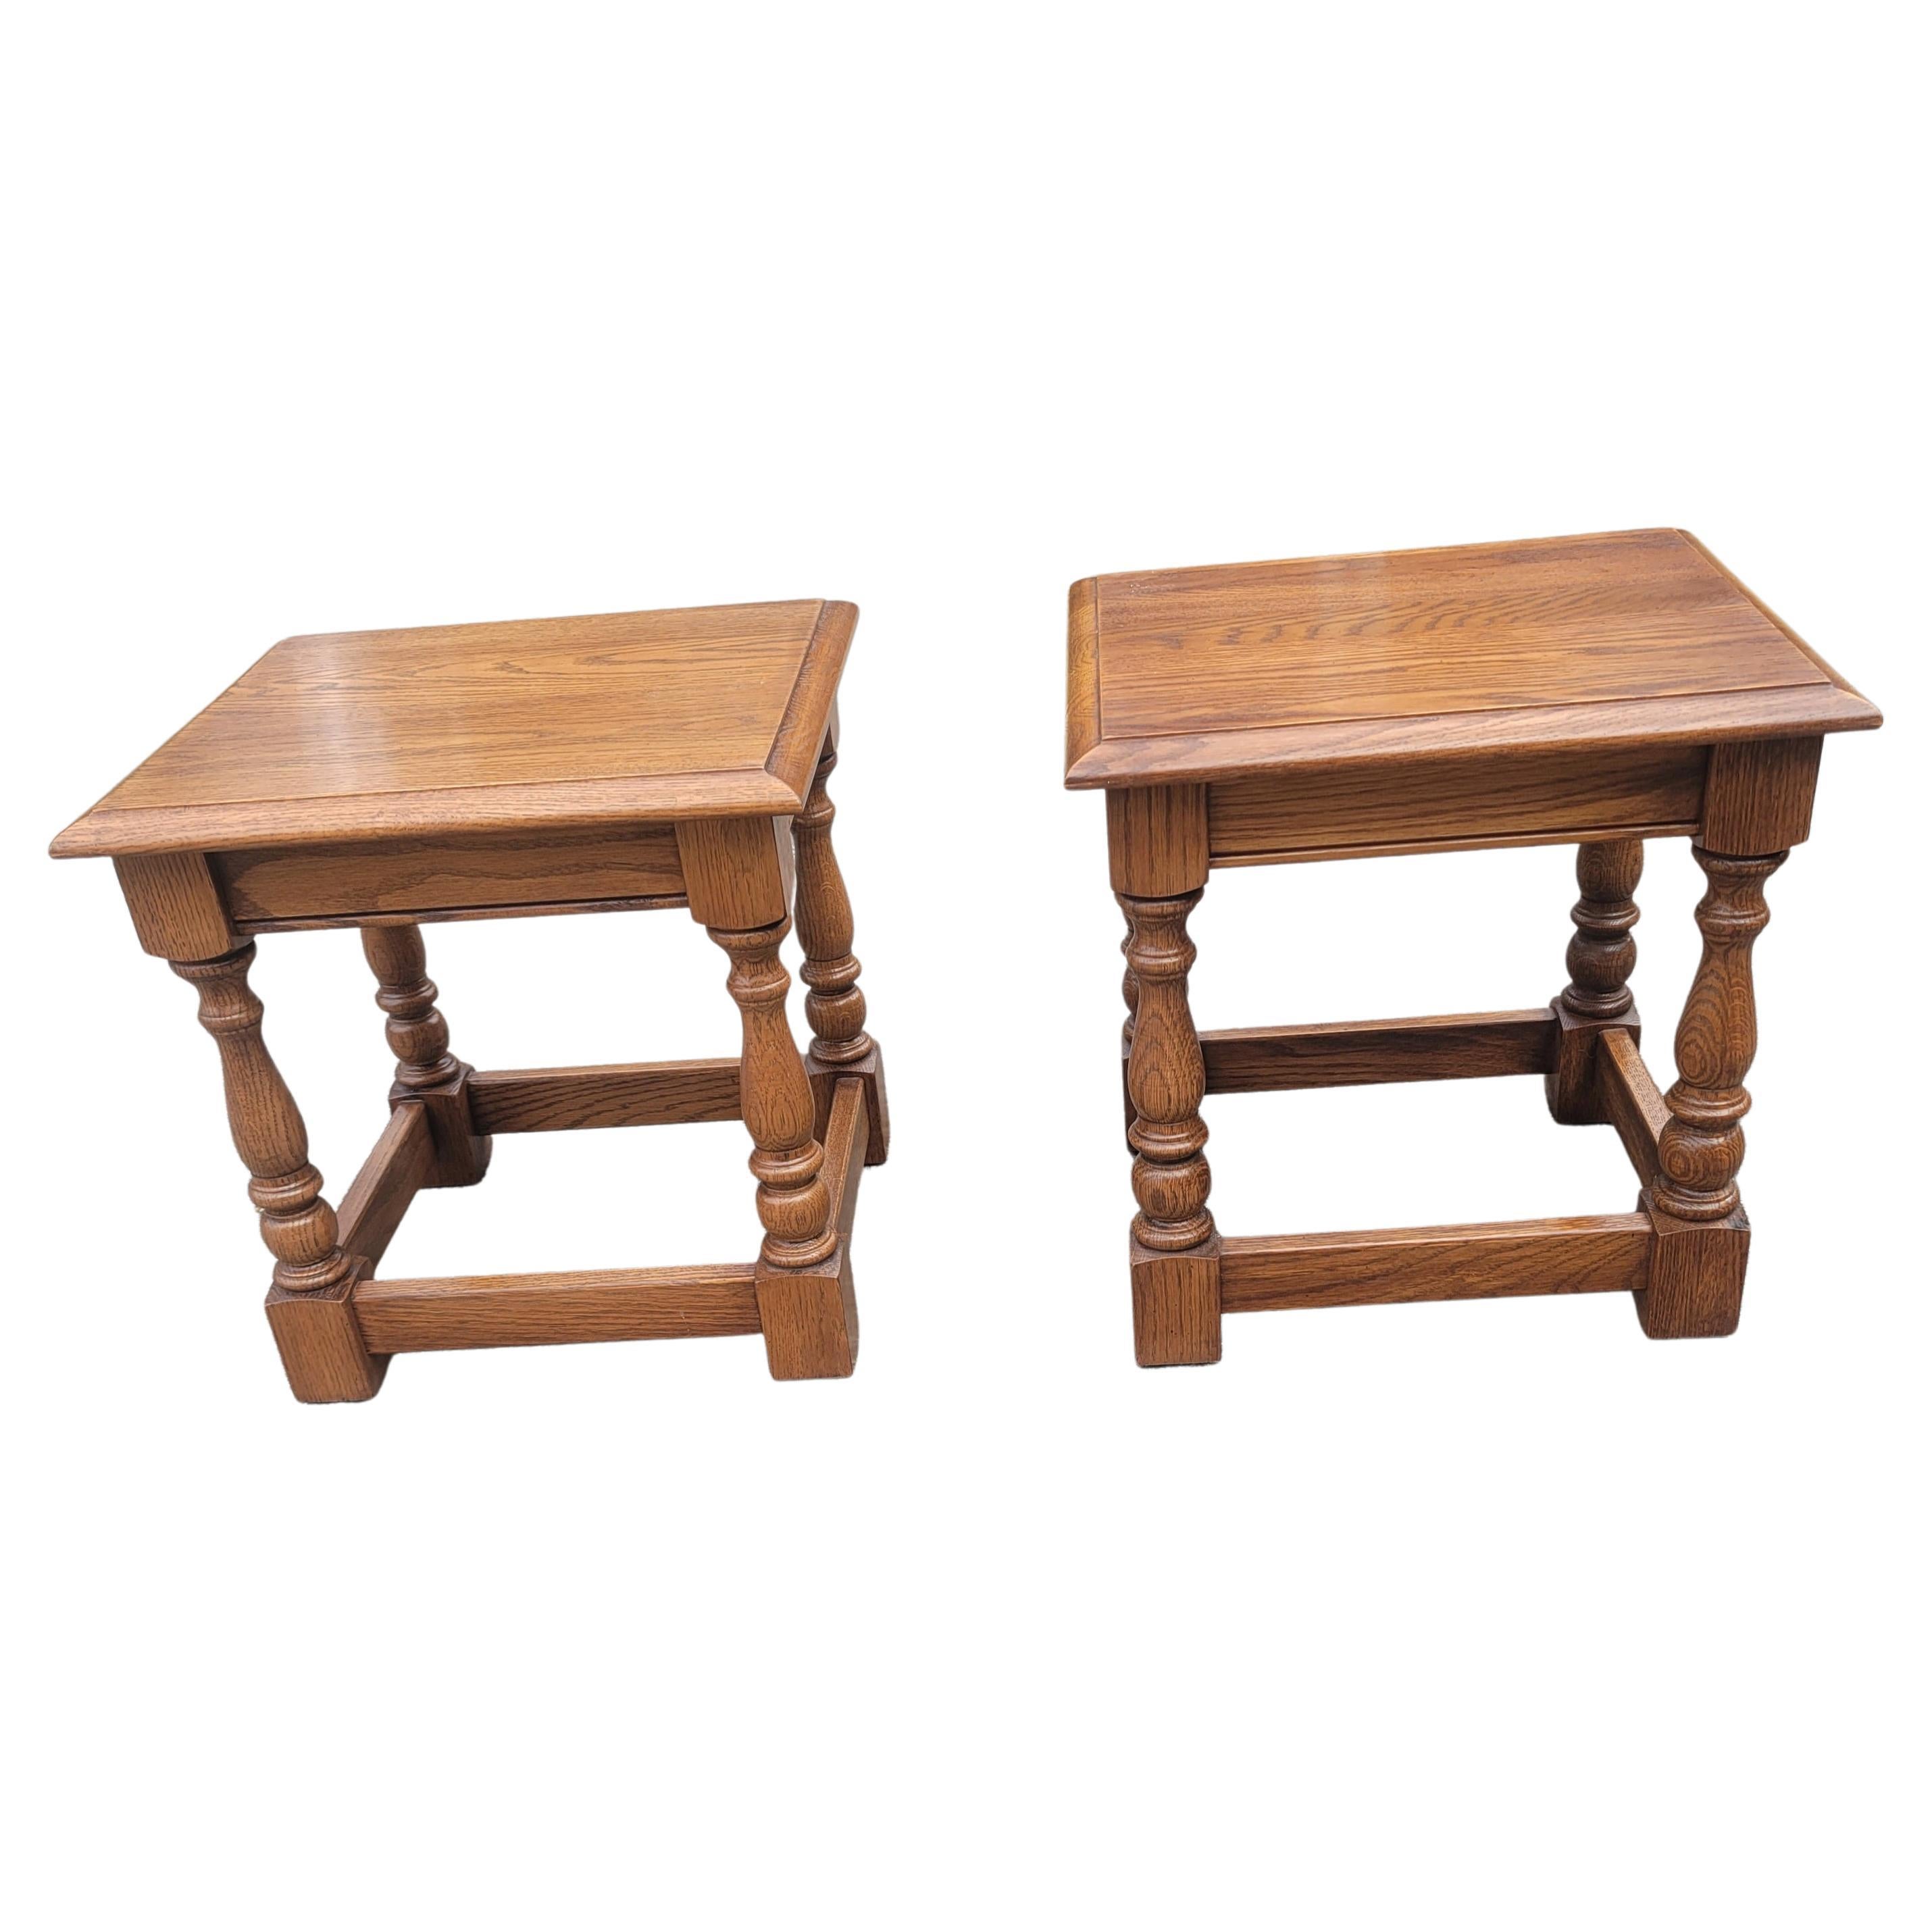 Country View Amish Handcrafted Mission Tabourets bas en chêne